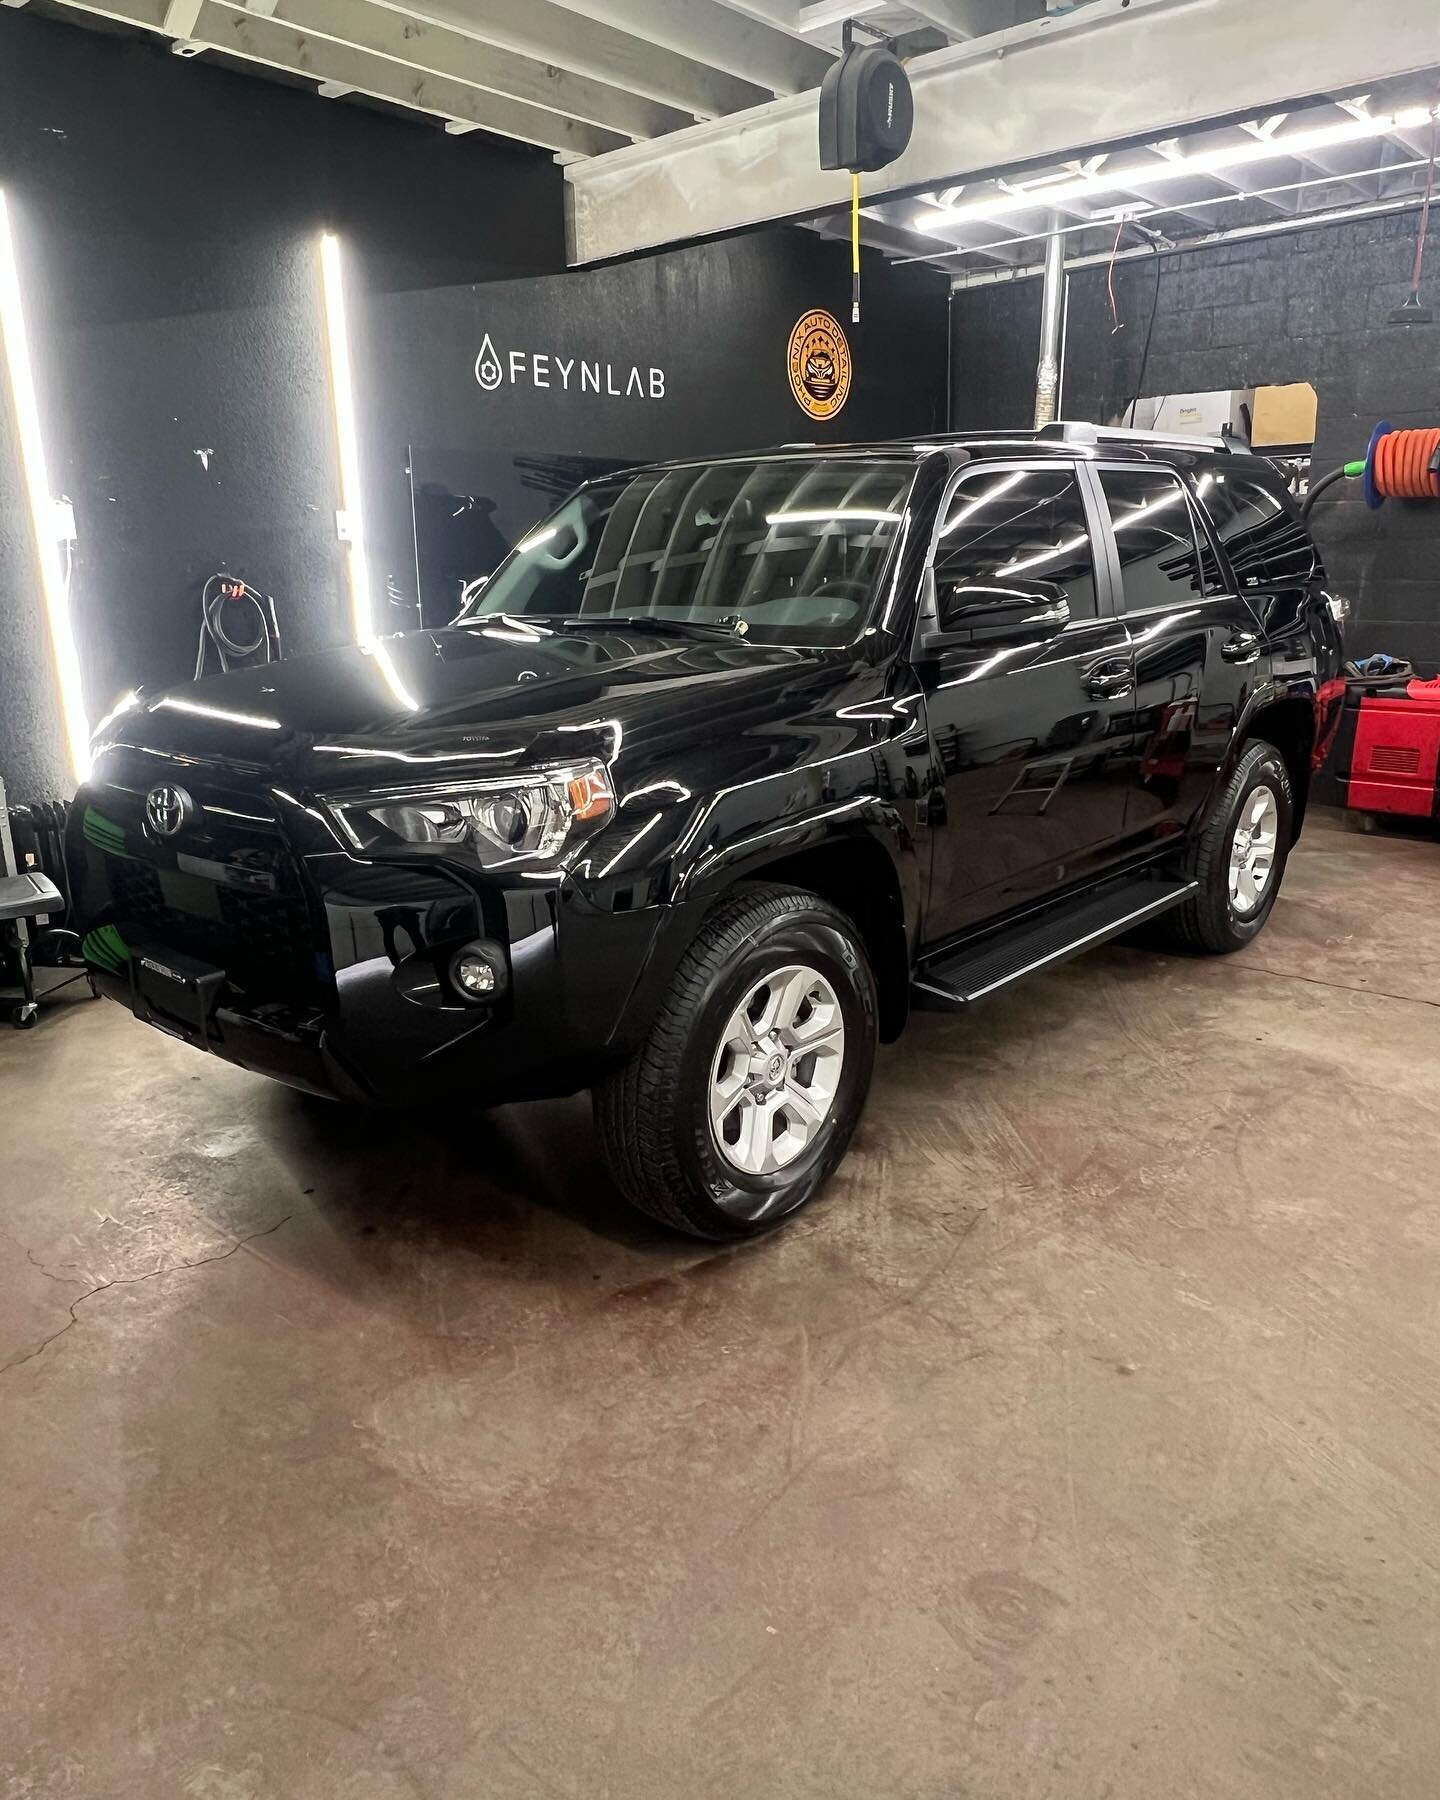 2023 Toyota 4 Runner in for 20% Xpel Prime XR window tint. Prime XR is a ceramic film that keeps you and your vehicle&rsquo;s interior cool and safe by blocking 99% of harmful UV rays and 85% of infrared heat. Also, this 2023 Toyota 4 Runner Check ca